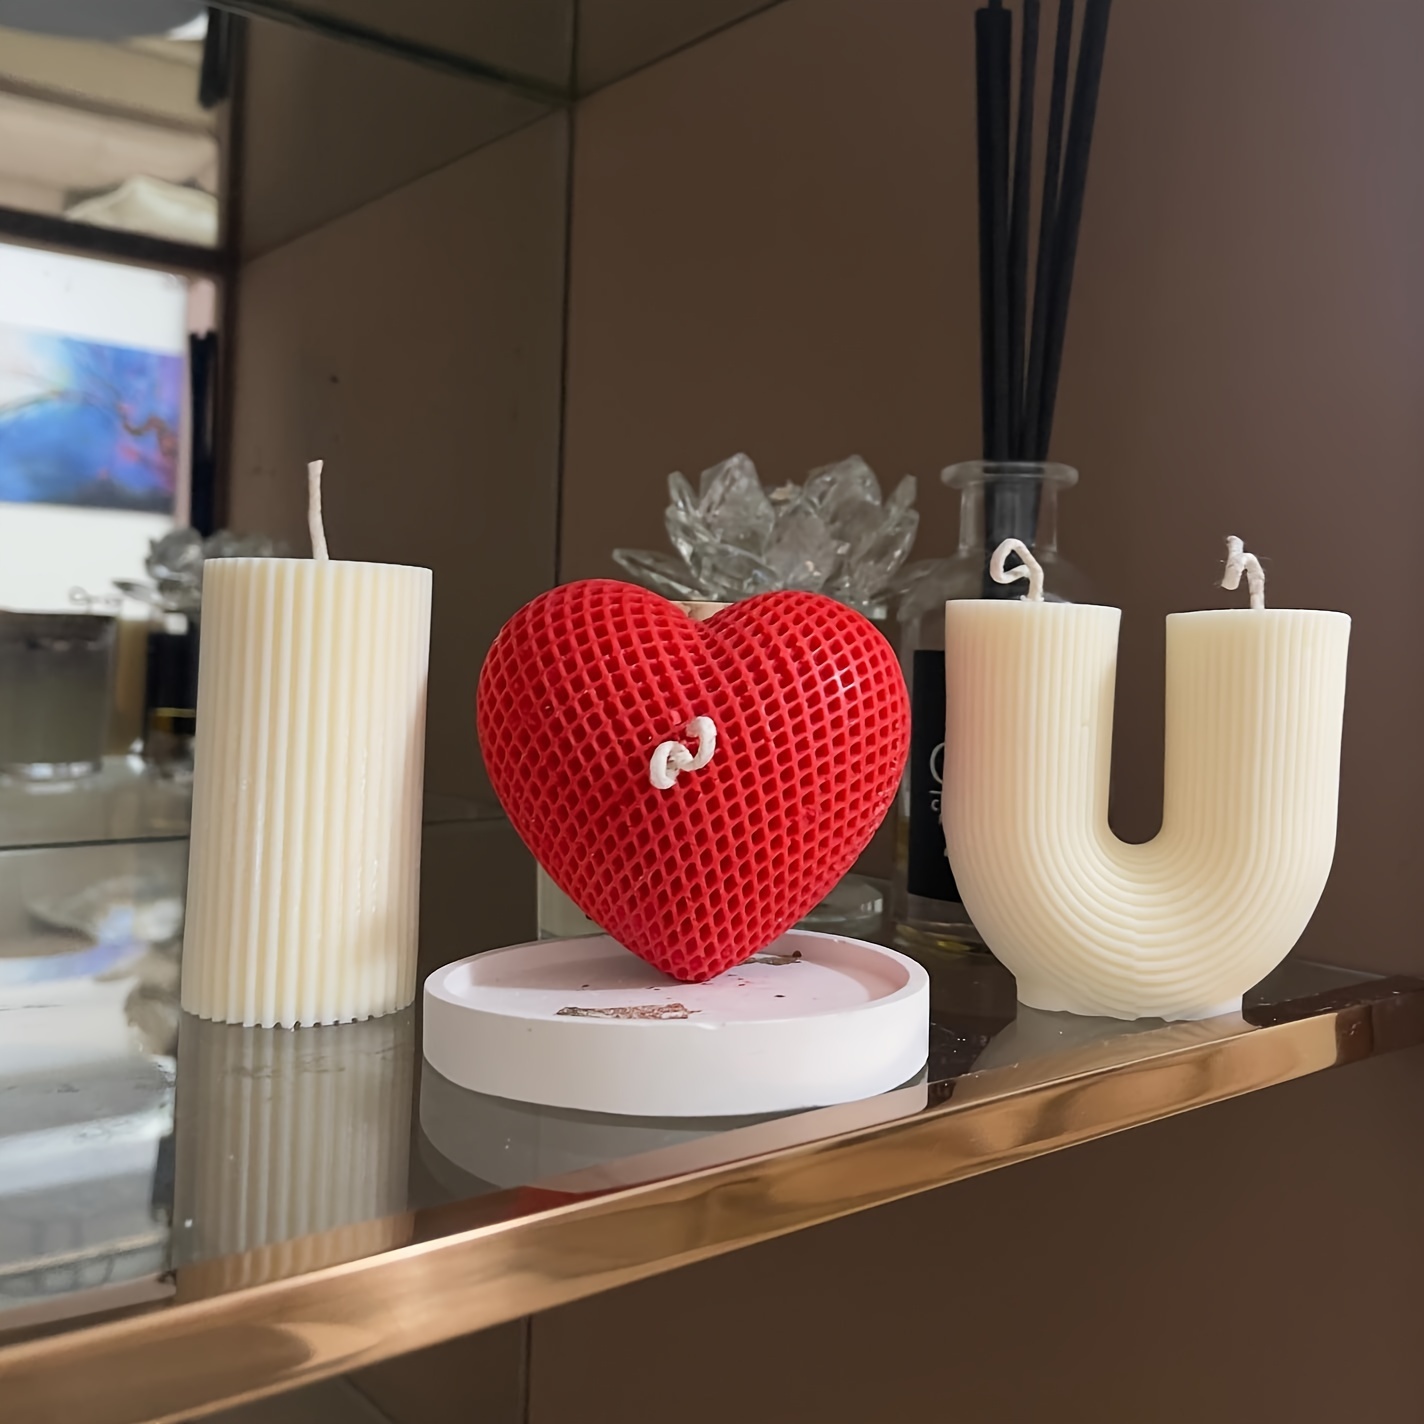 1Pc 3D Heart-shaped Candle Silicone Mold DIY Handmade Candle Decoration  Mo;;^